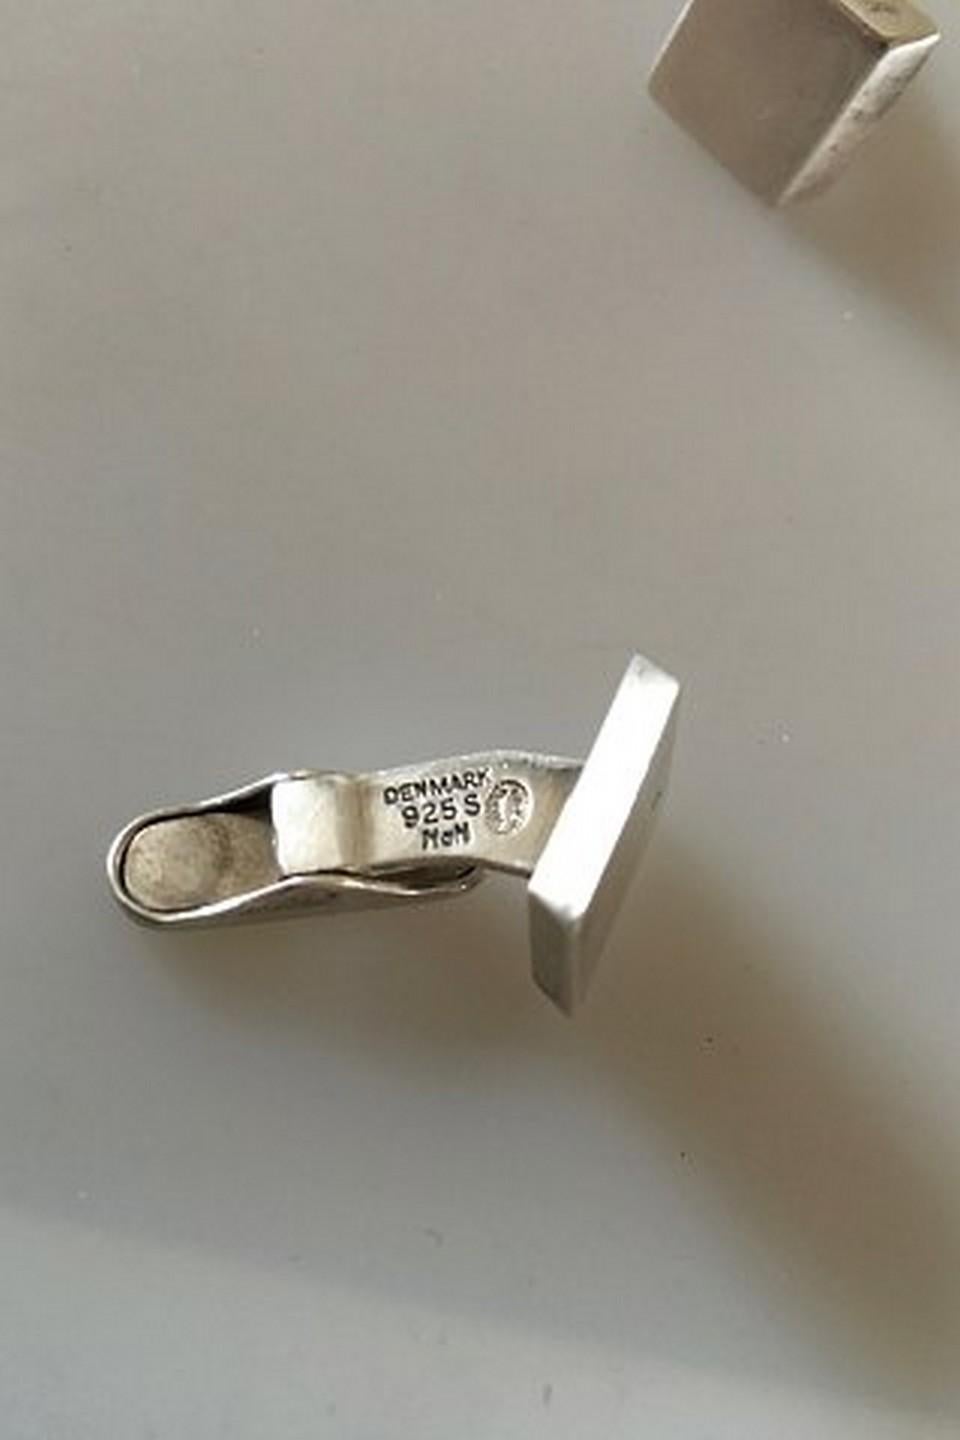 Georg Jensen Sterling Silver Cuff Links. From after 1945. Also marked with Hans Hansen. Measures 1.5 cm / 0 19/32 in. x 1.5 cm / 0 19/32 in.
Weighs 20 g.